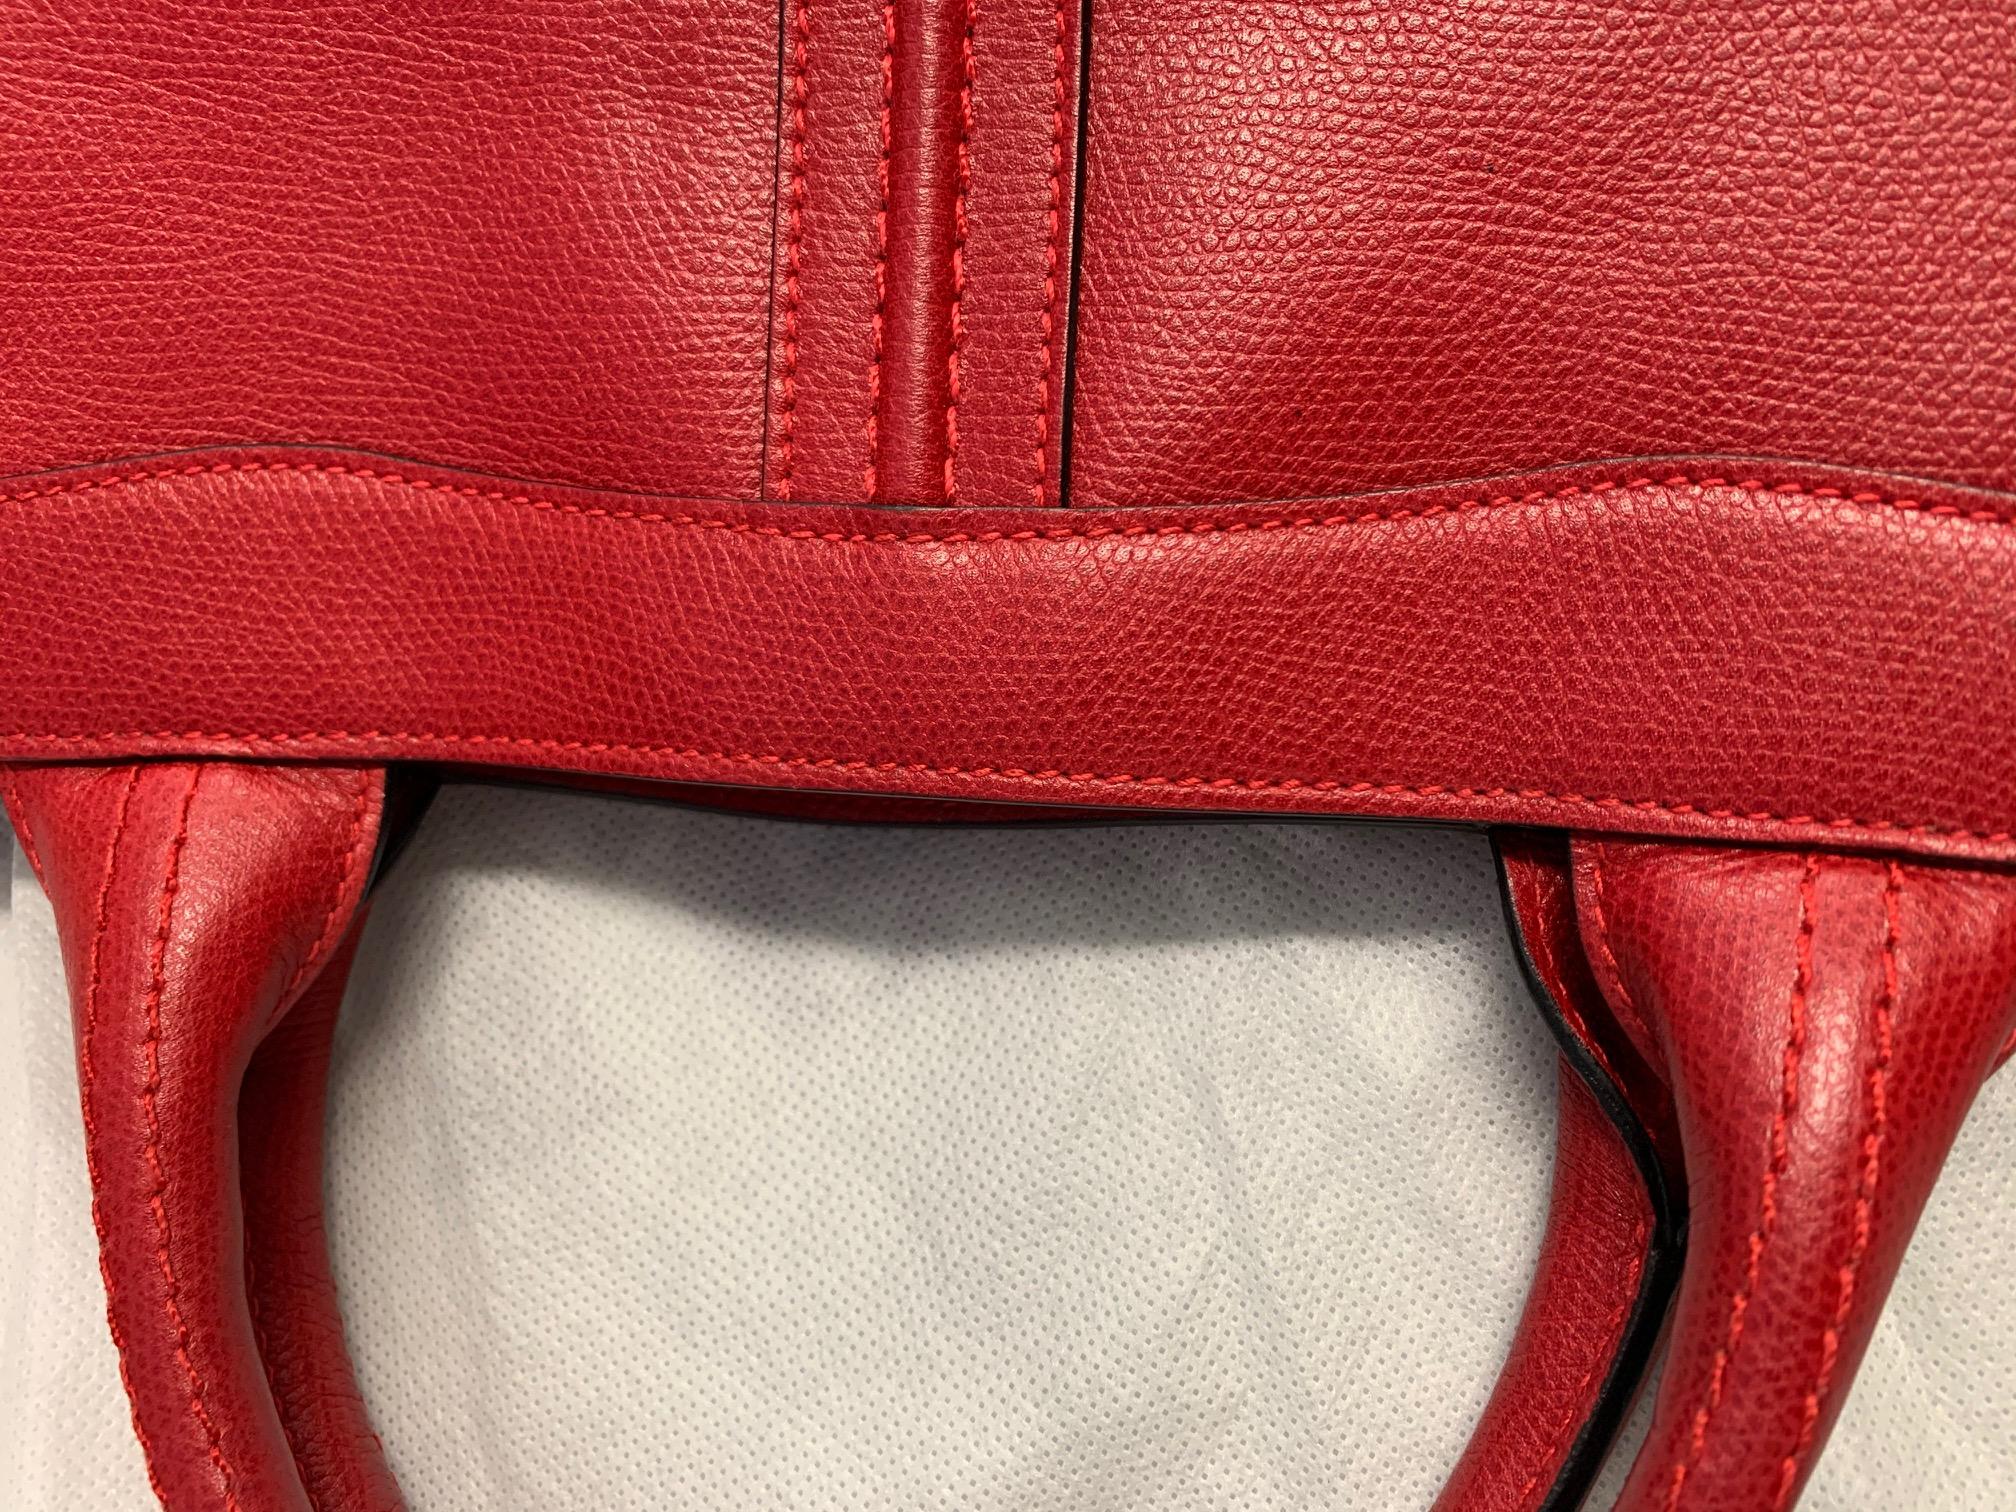 2000s Valextra Red Leather Bag 6